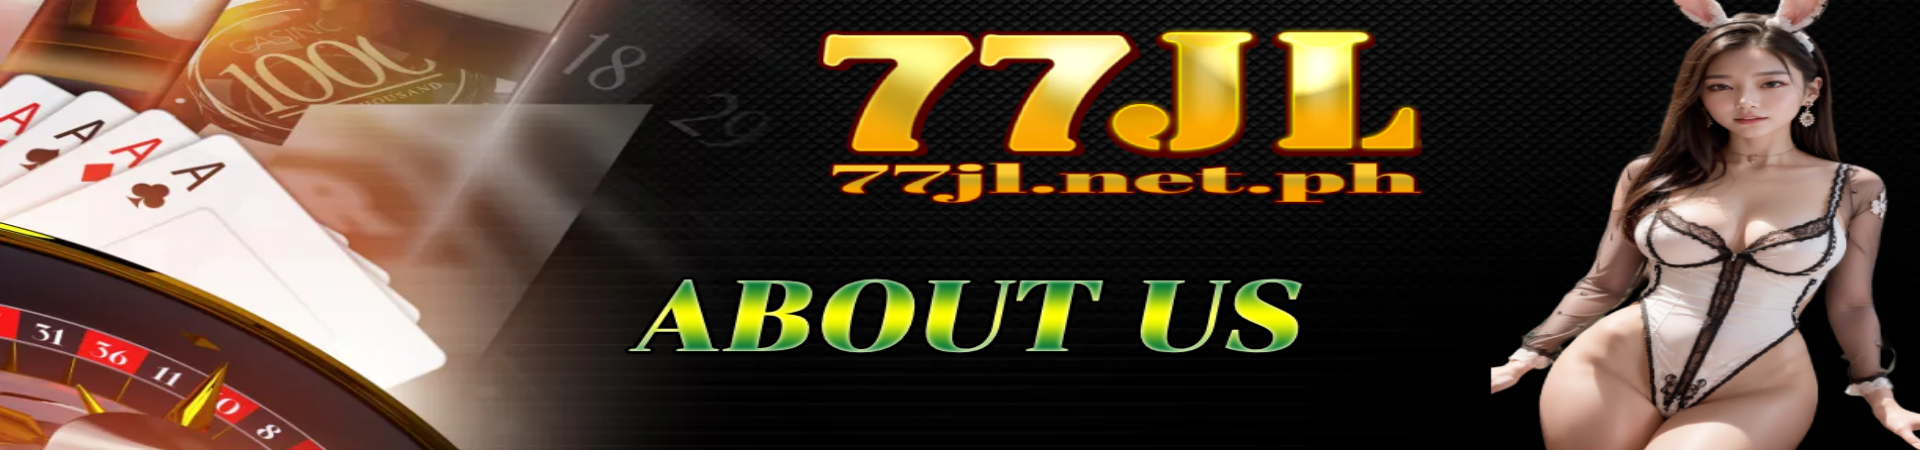 about us 77jl banner